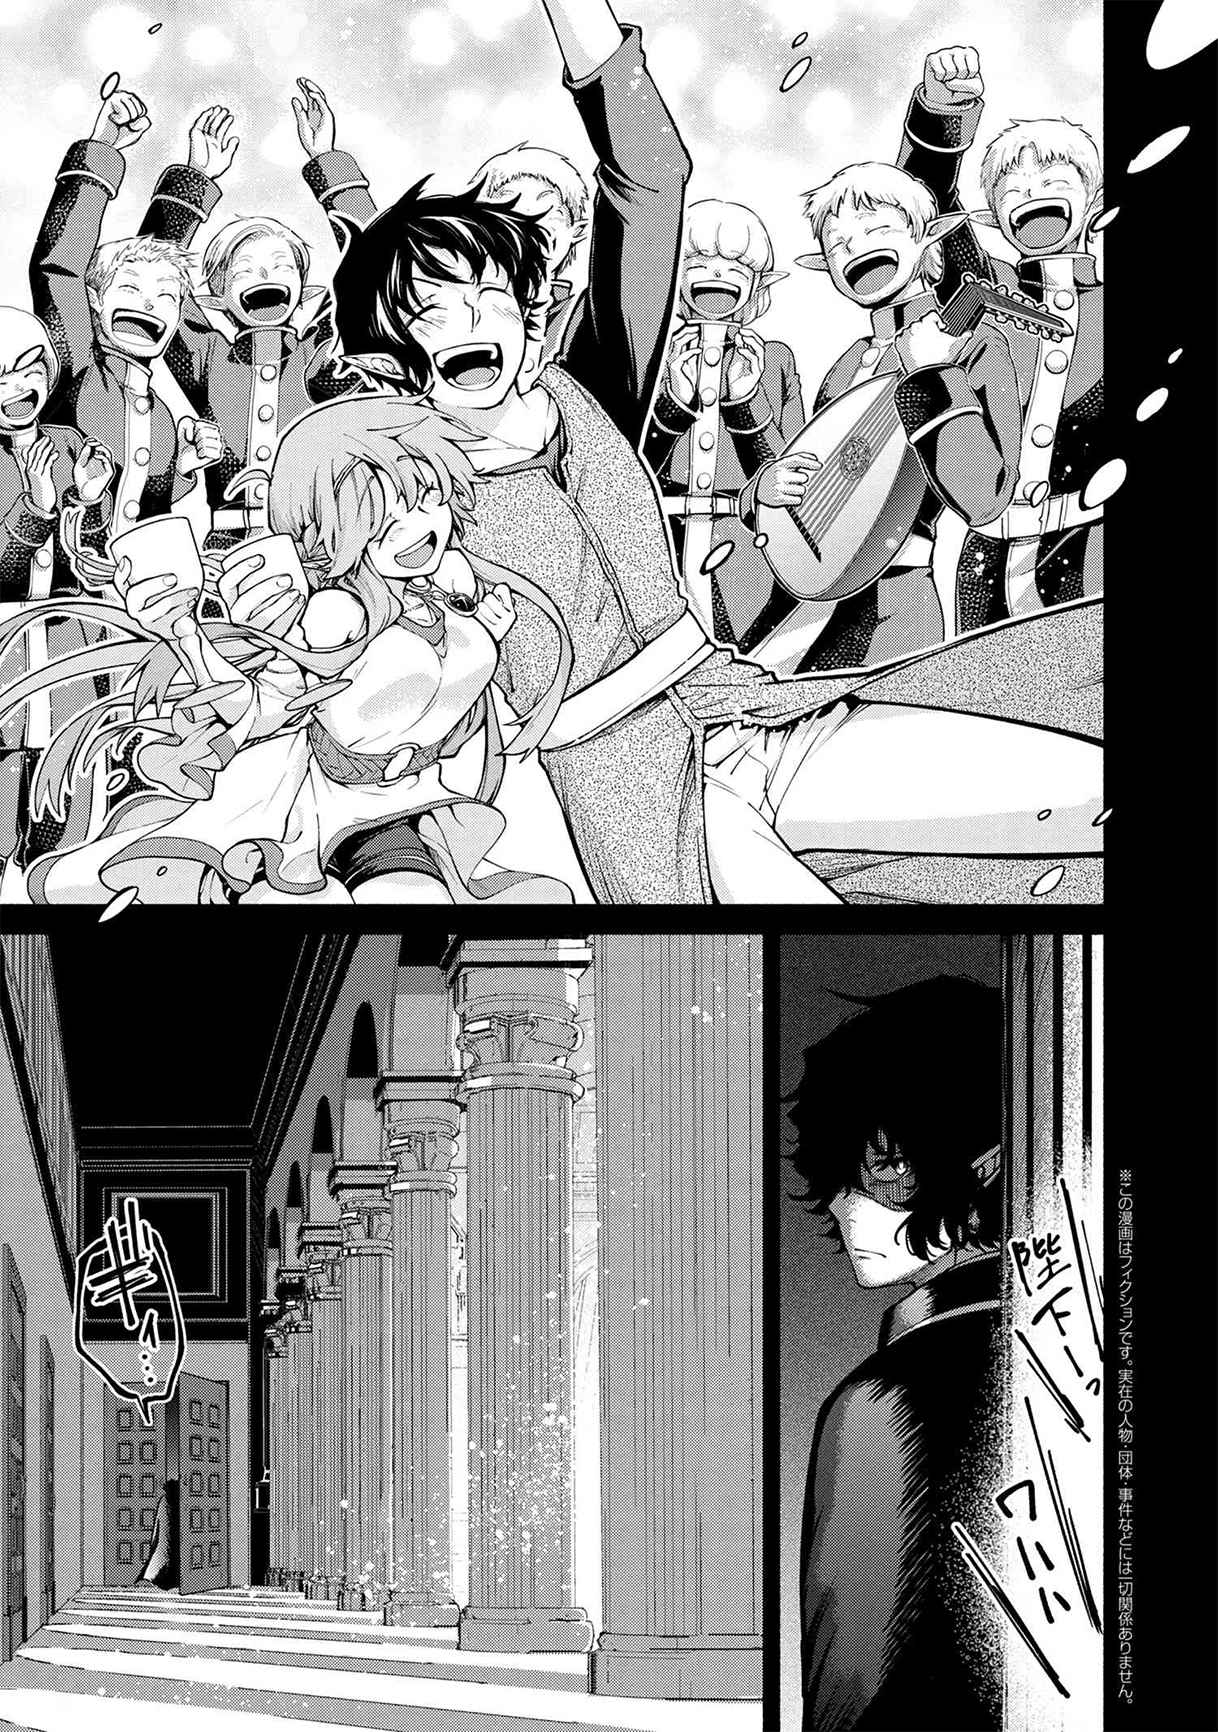 Heroic Chronicles of the Three Continents Manga Chapter 18.2